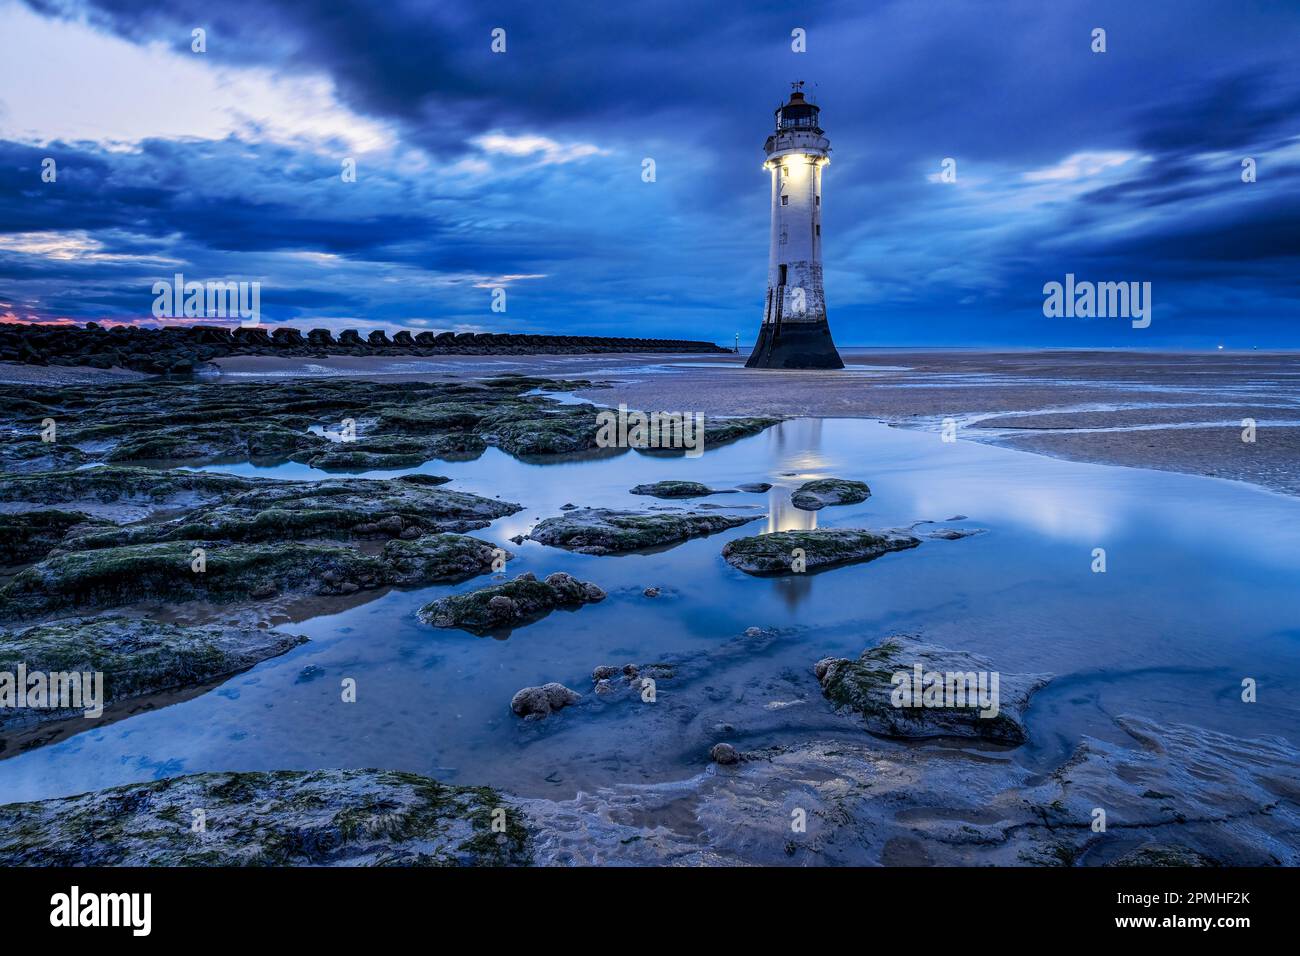 Perch Rock Lighthouse and the sands of New Brighton at twilight, New Brighton, The Wirral, Merseyside, England, United Kingdom, Europe Stock Photo